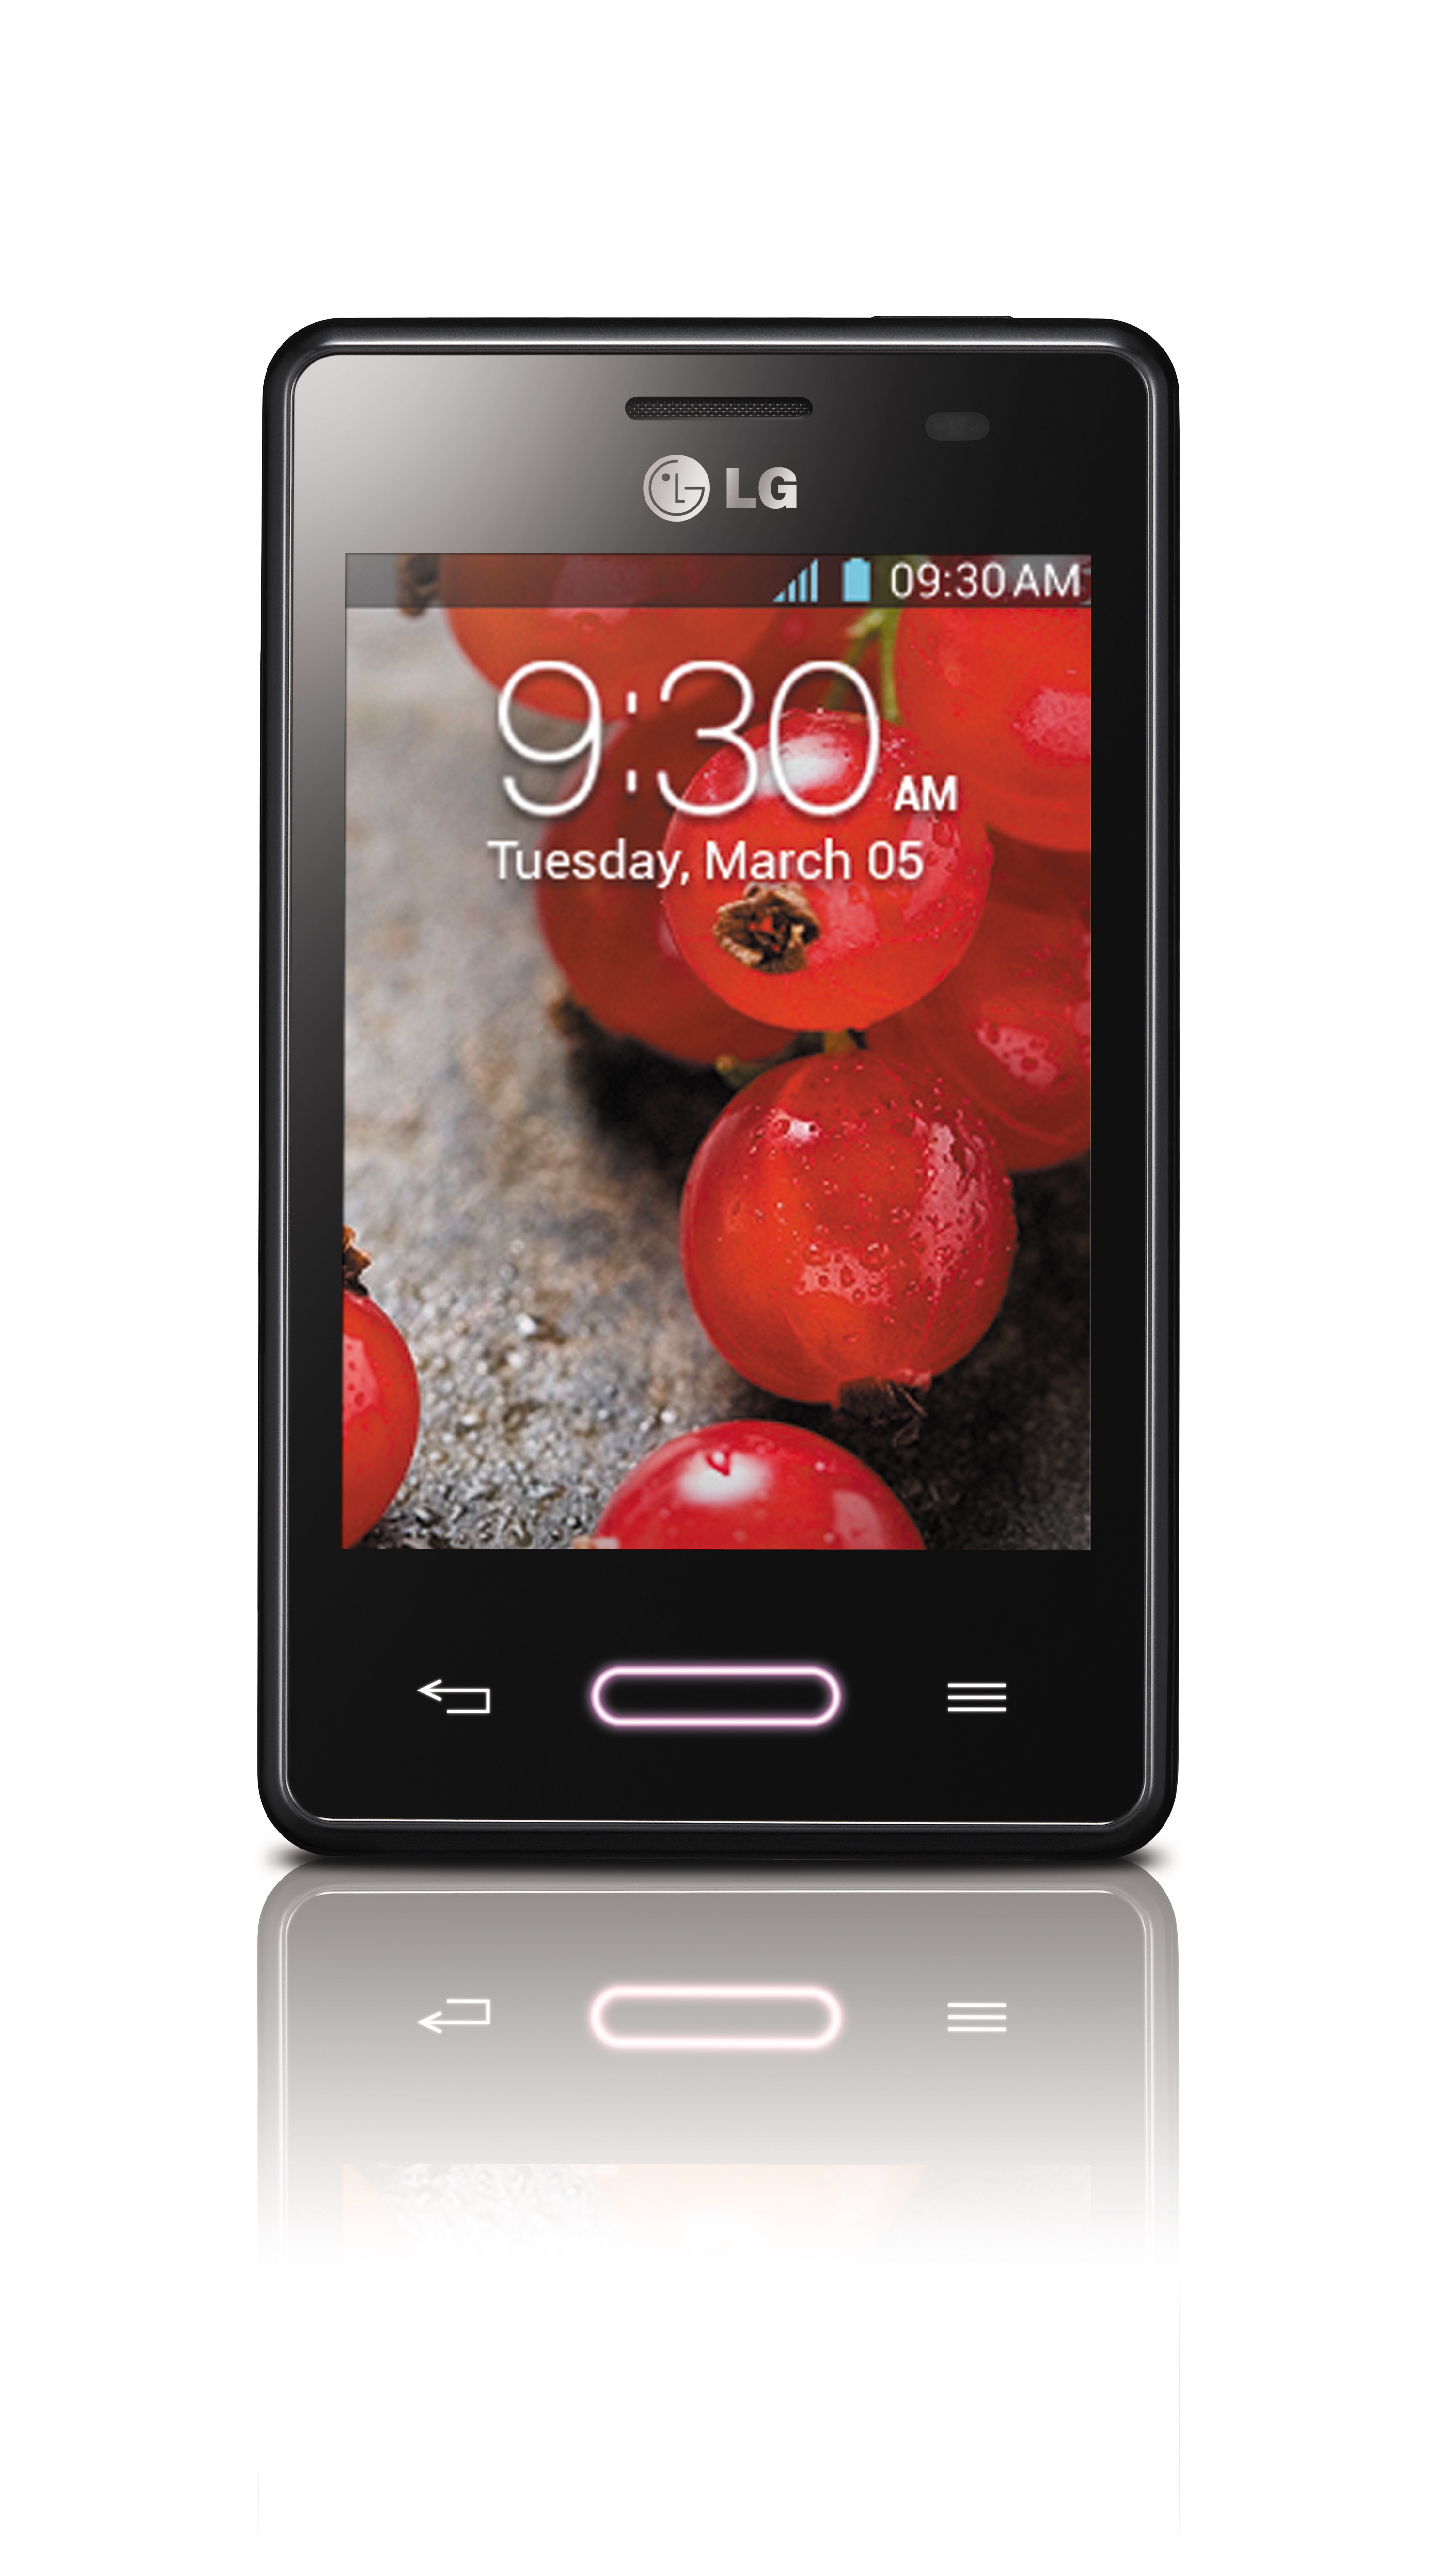 A front view of the LG Optimus G Pro